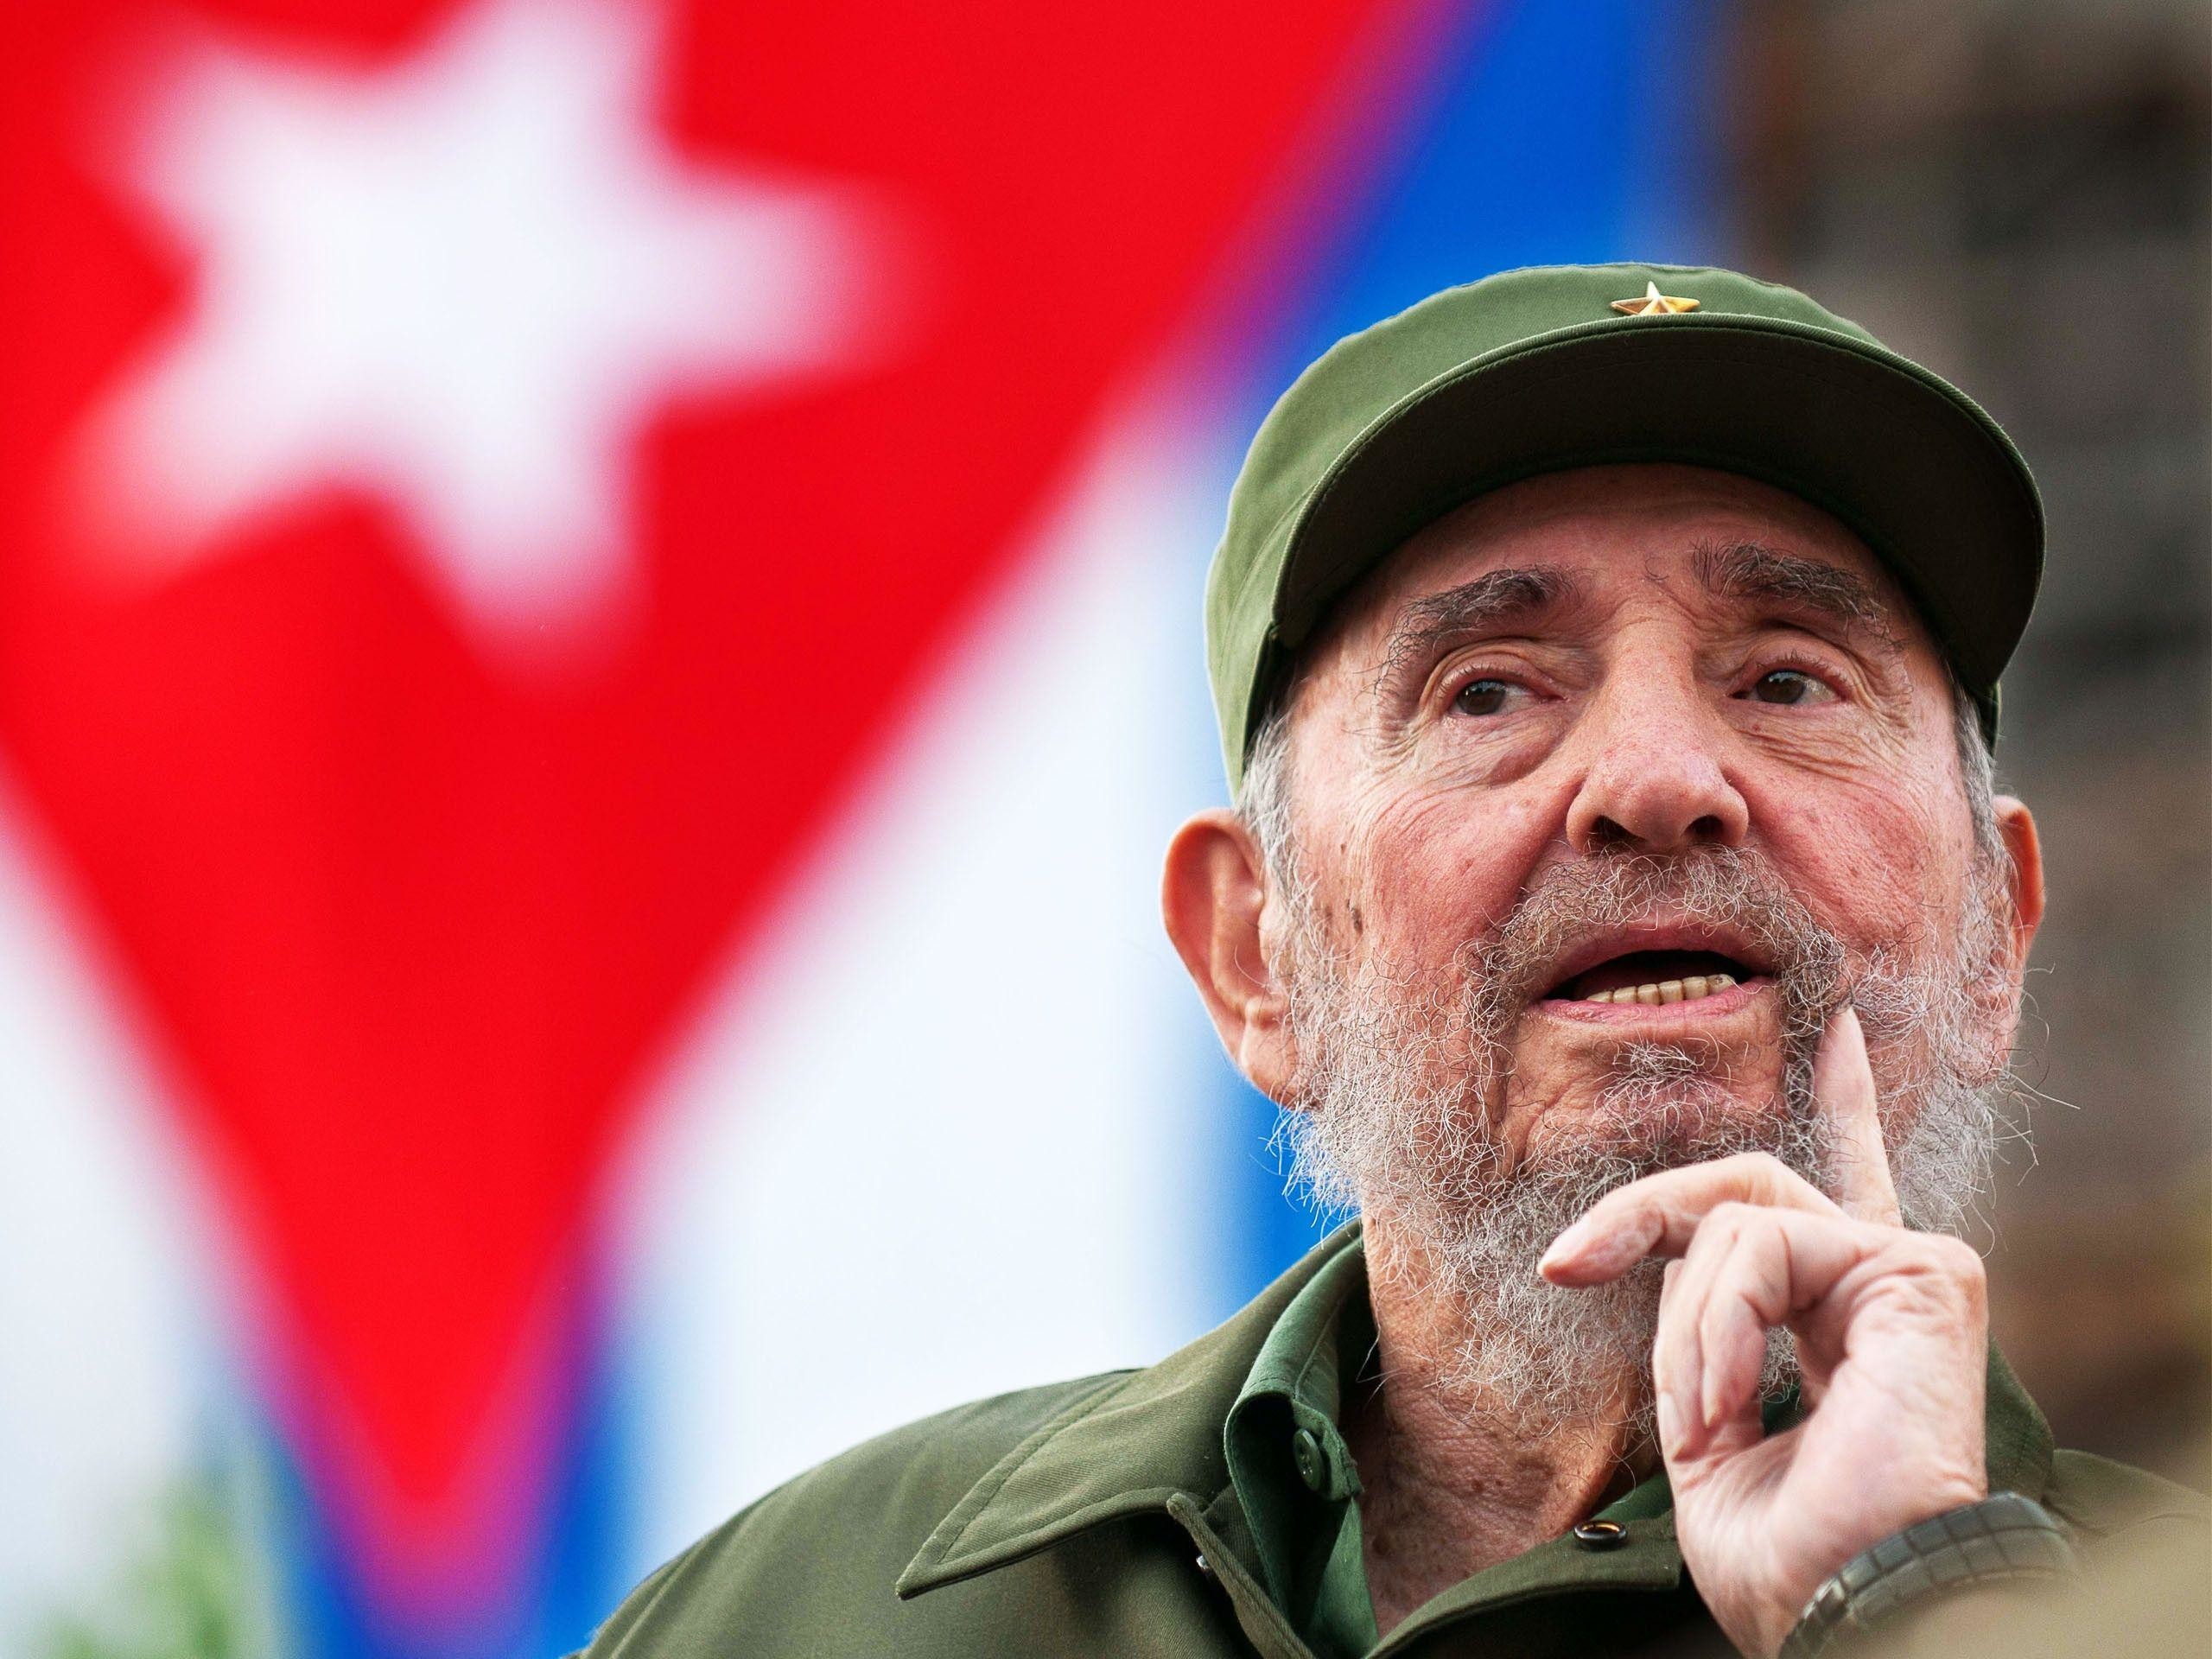 Hd Wallpapers Fidel Castro And Che Guevara 800 X 544 71 Kb Jpeg